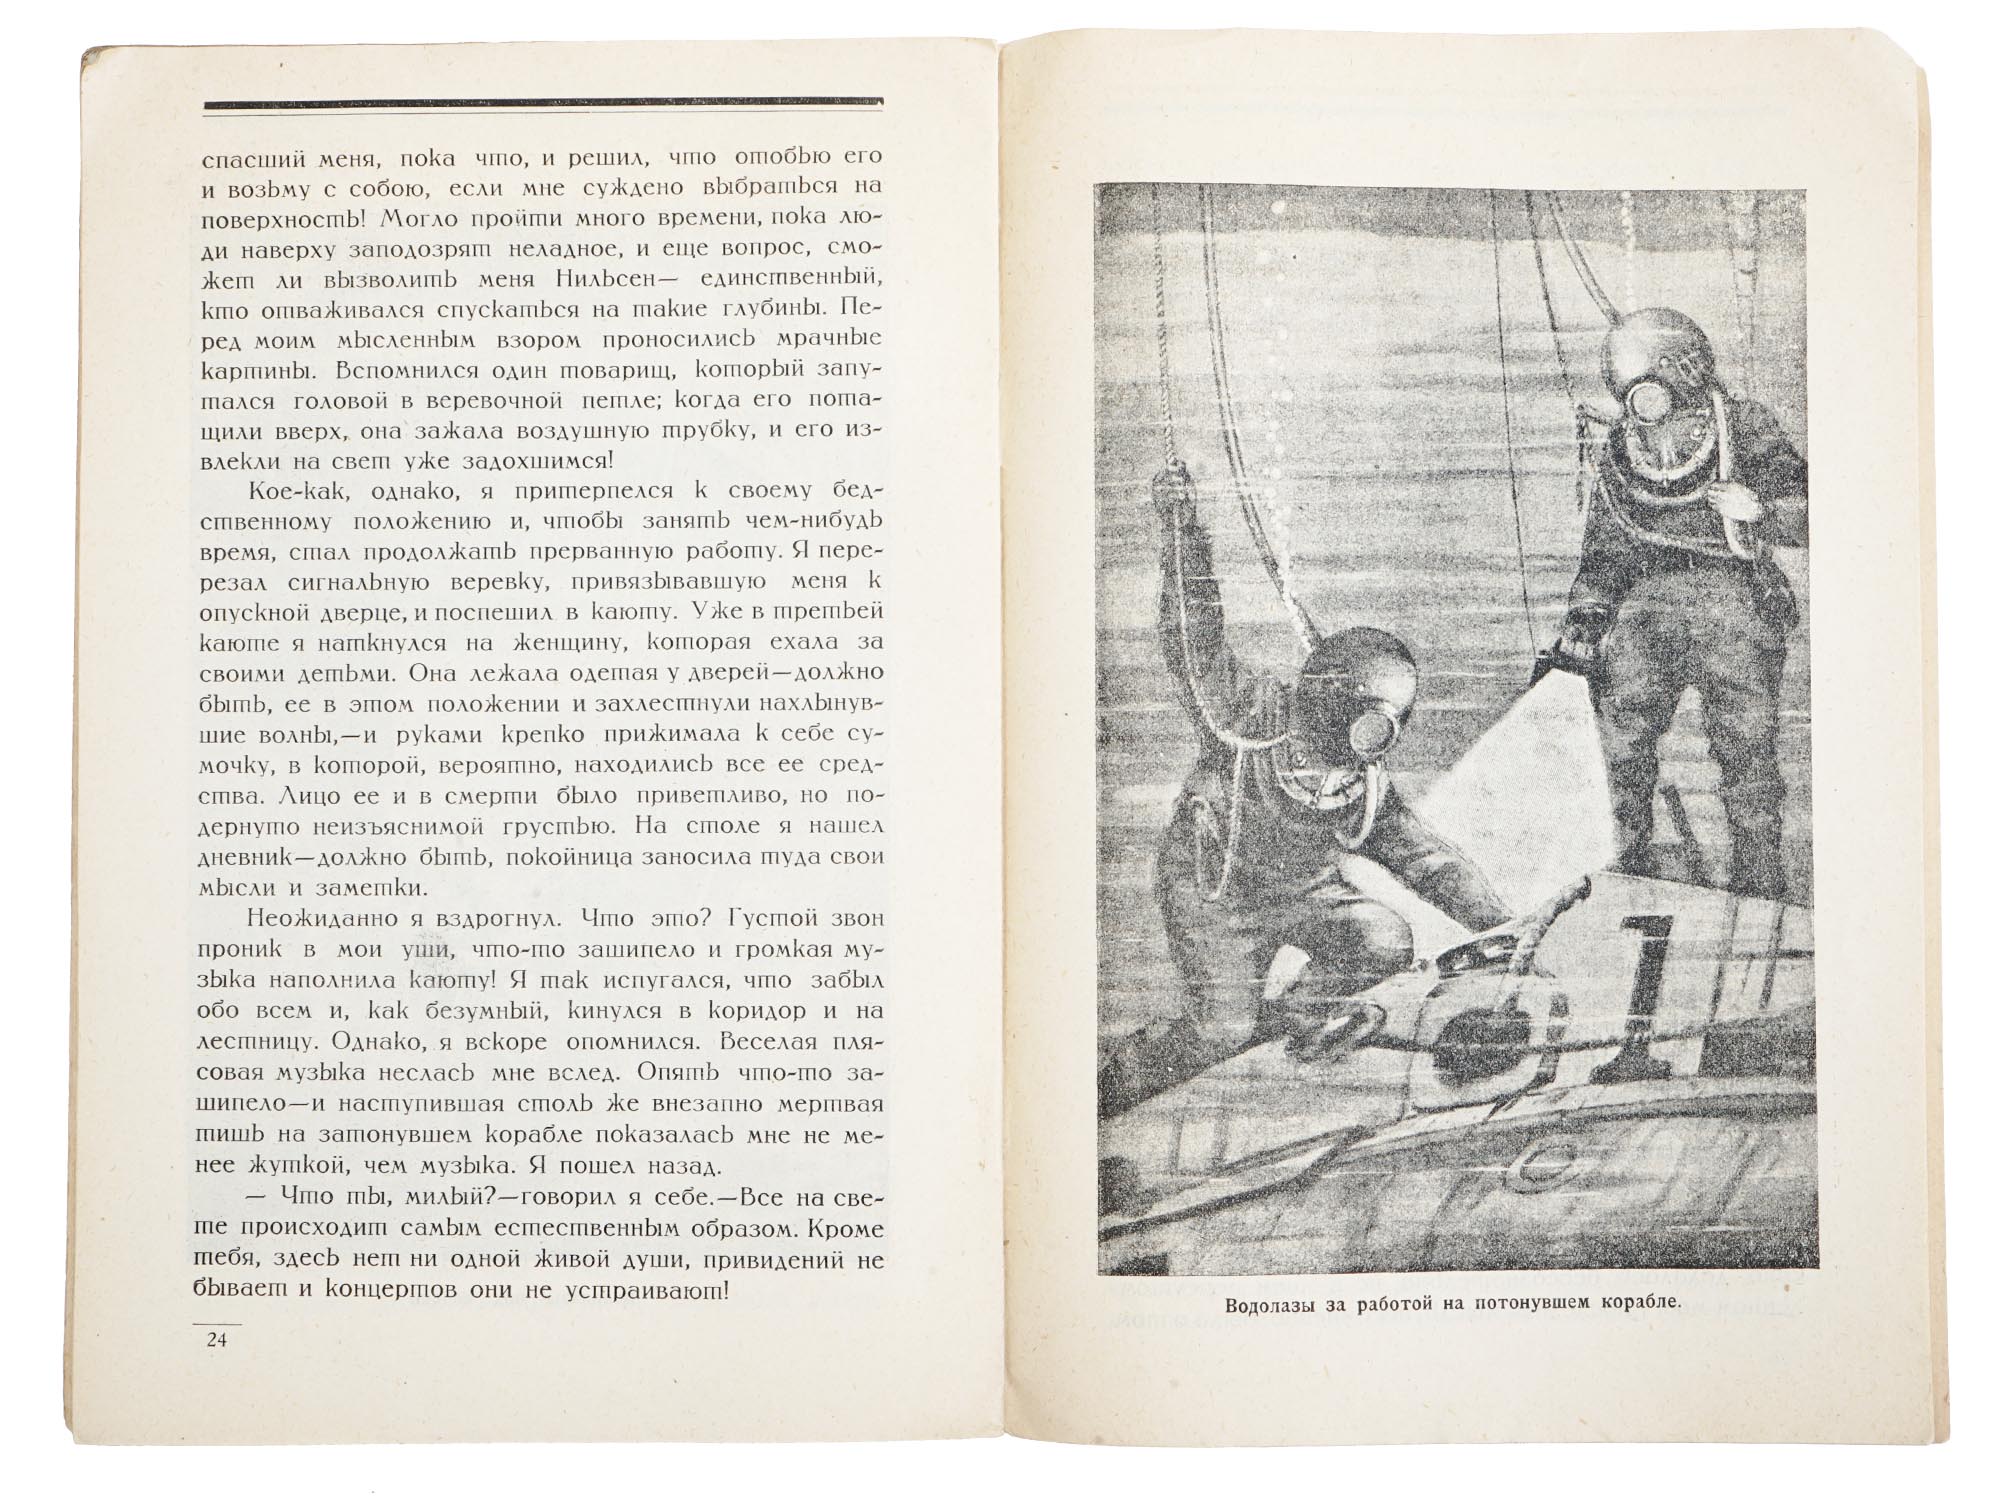 RUSSIAN SOVIET CHILDRENS BOOK WITH ILLUSTRATIONS PIC-5